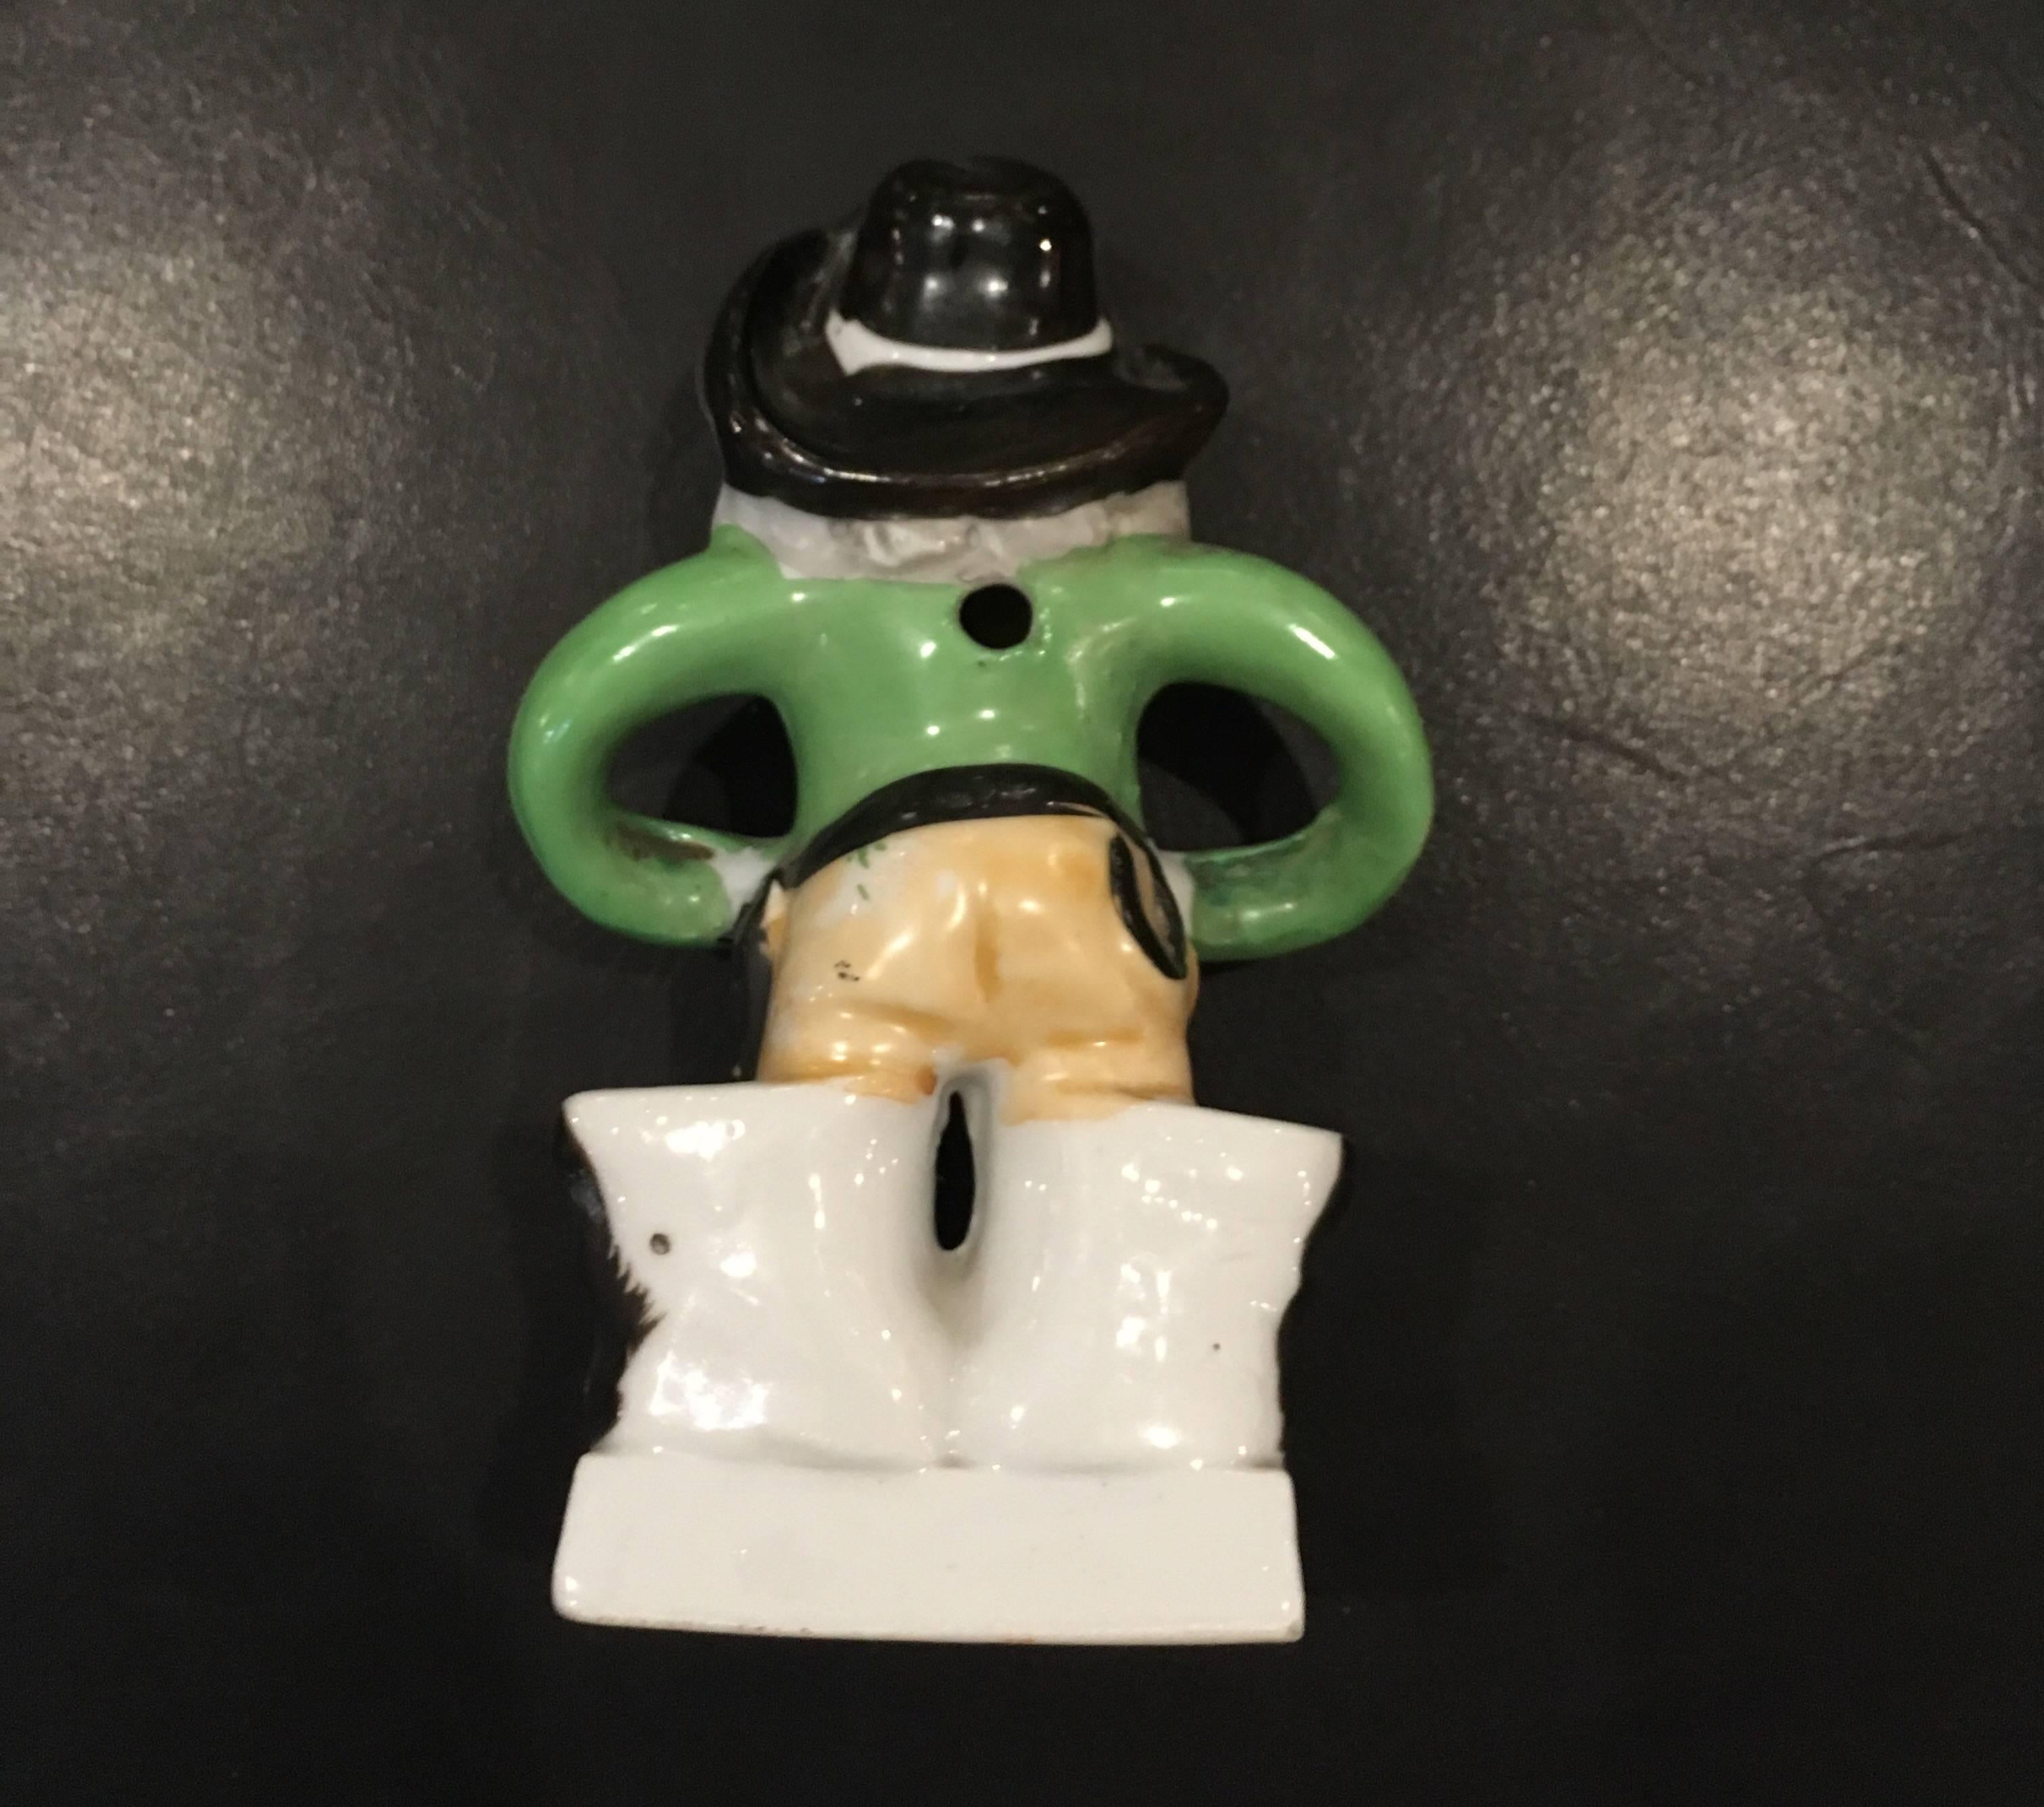 Nostalgic and very fun toothbrush holder made in Japan for good little boys and girls.
Holds two small toothbrushes, and has a spot for a small tube of toothpaste to lay at the pirates feet.